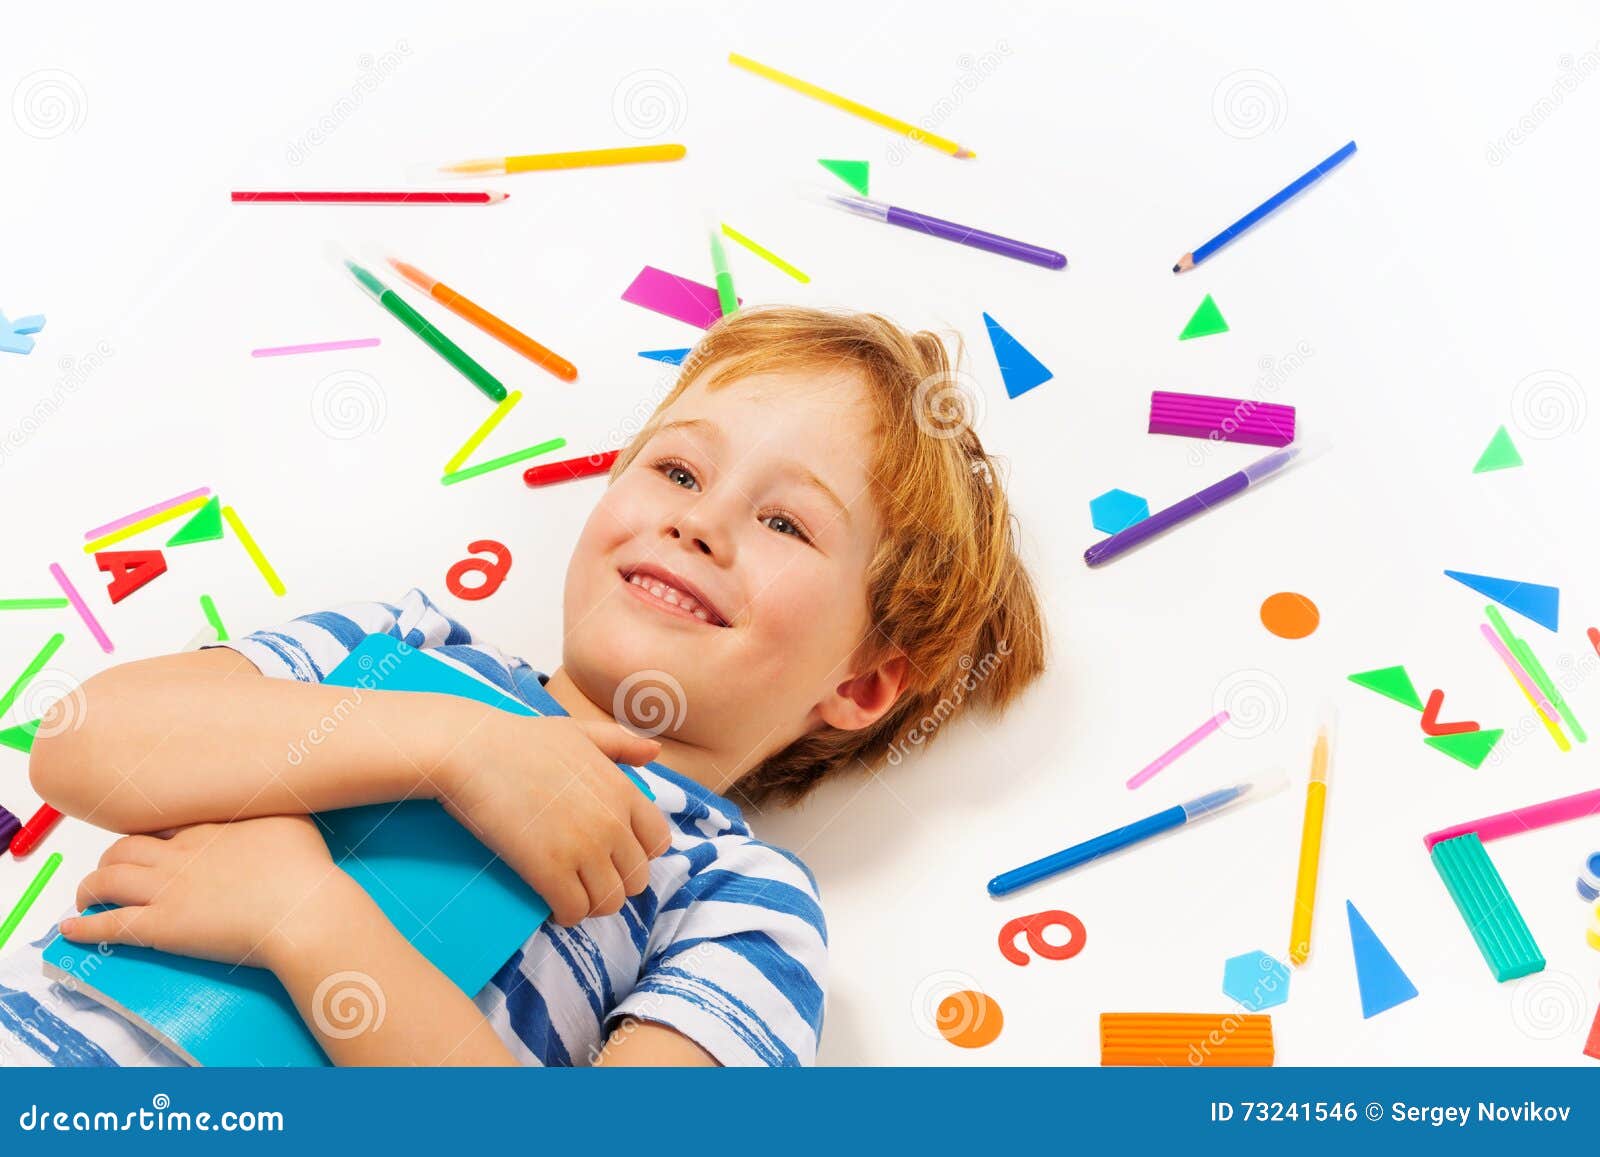 smiling boy having a rest among heap of stationery